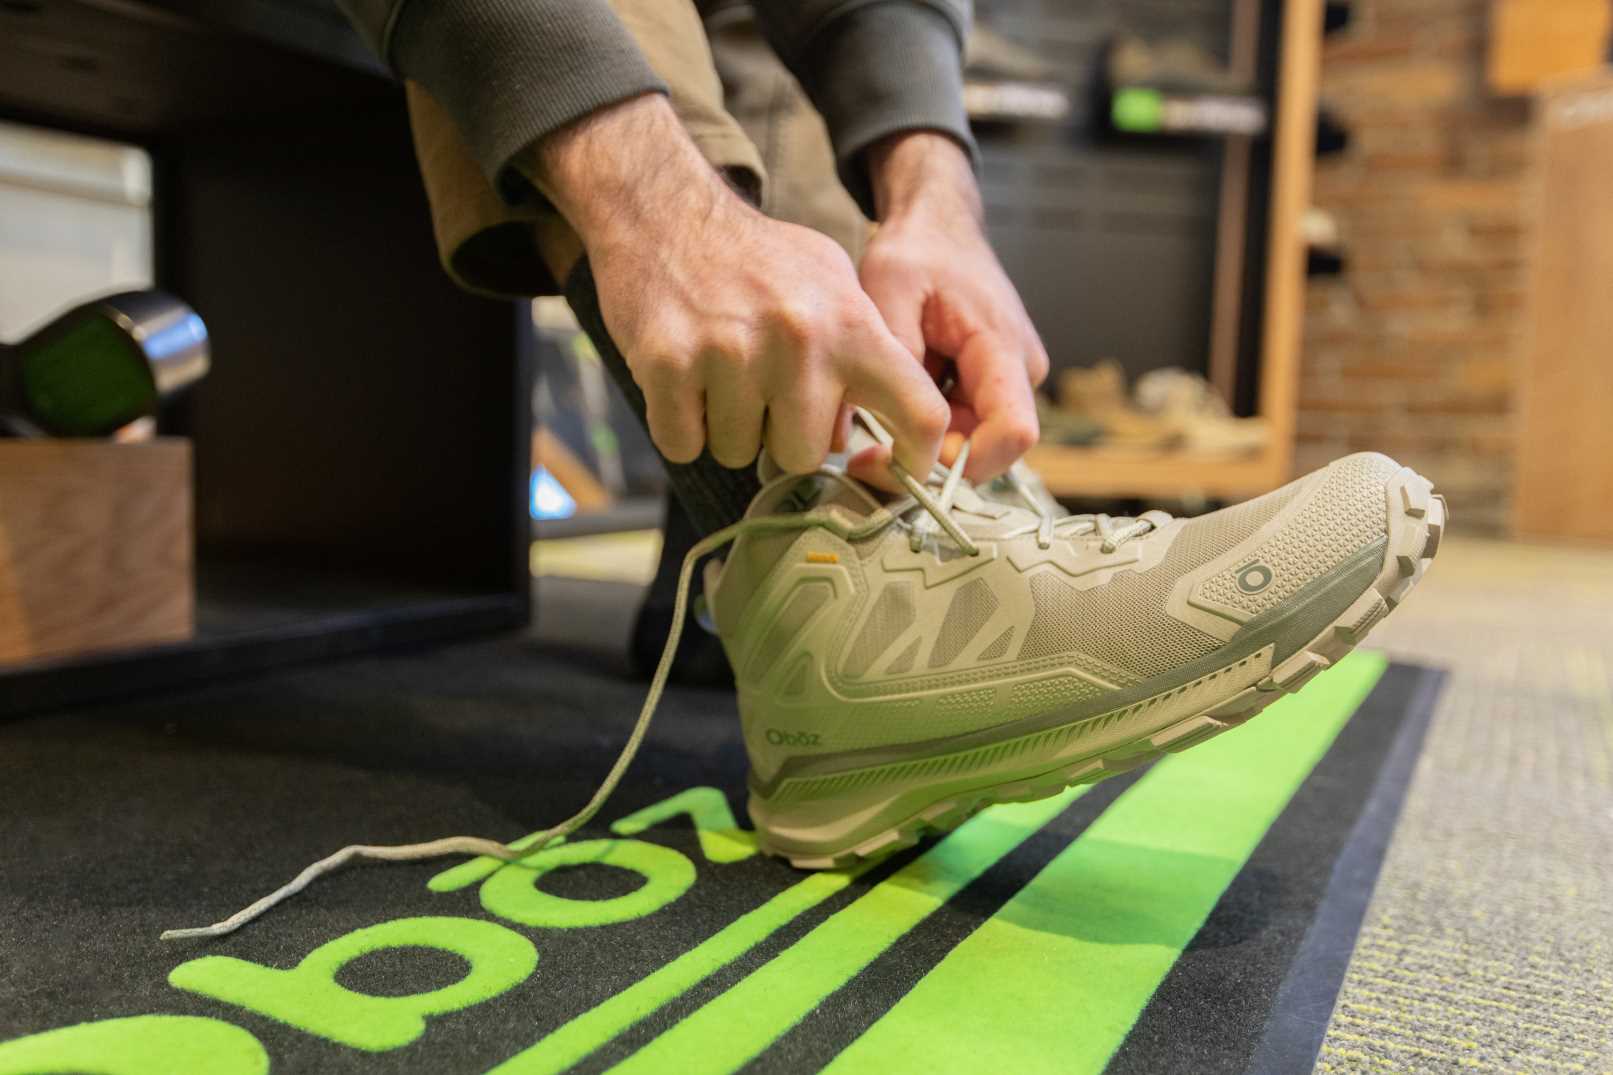 A person ties their Oboz Katabatic shoe during a fitting with an Oboz retailer. 